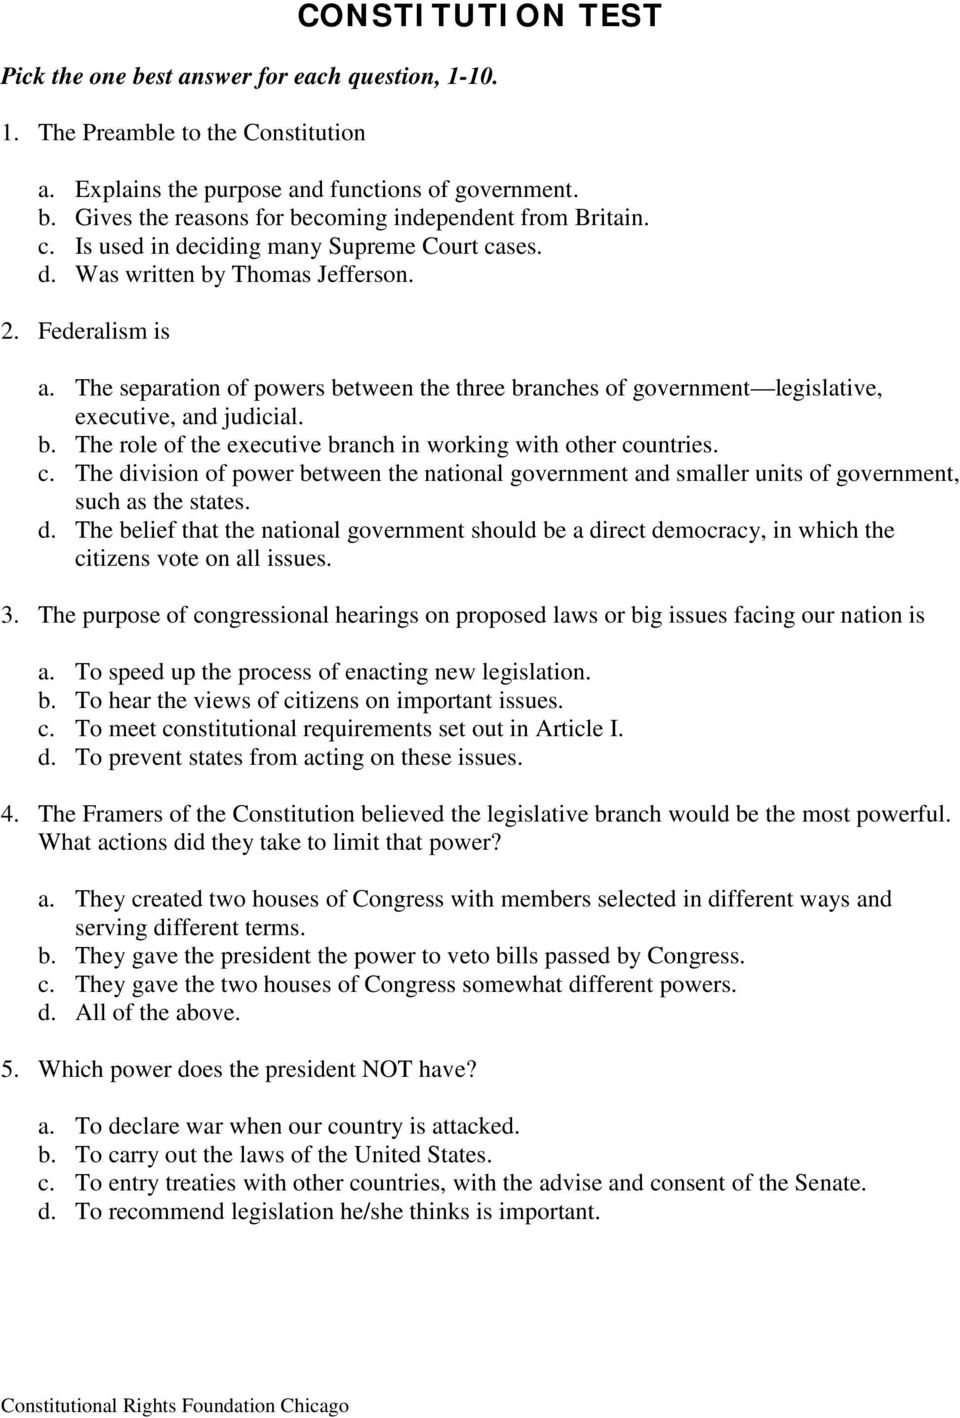 The separation of powers between the three branches of government legislative, executive, and judicial. b. The role of the executive branch in working with other co